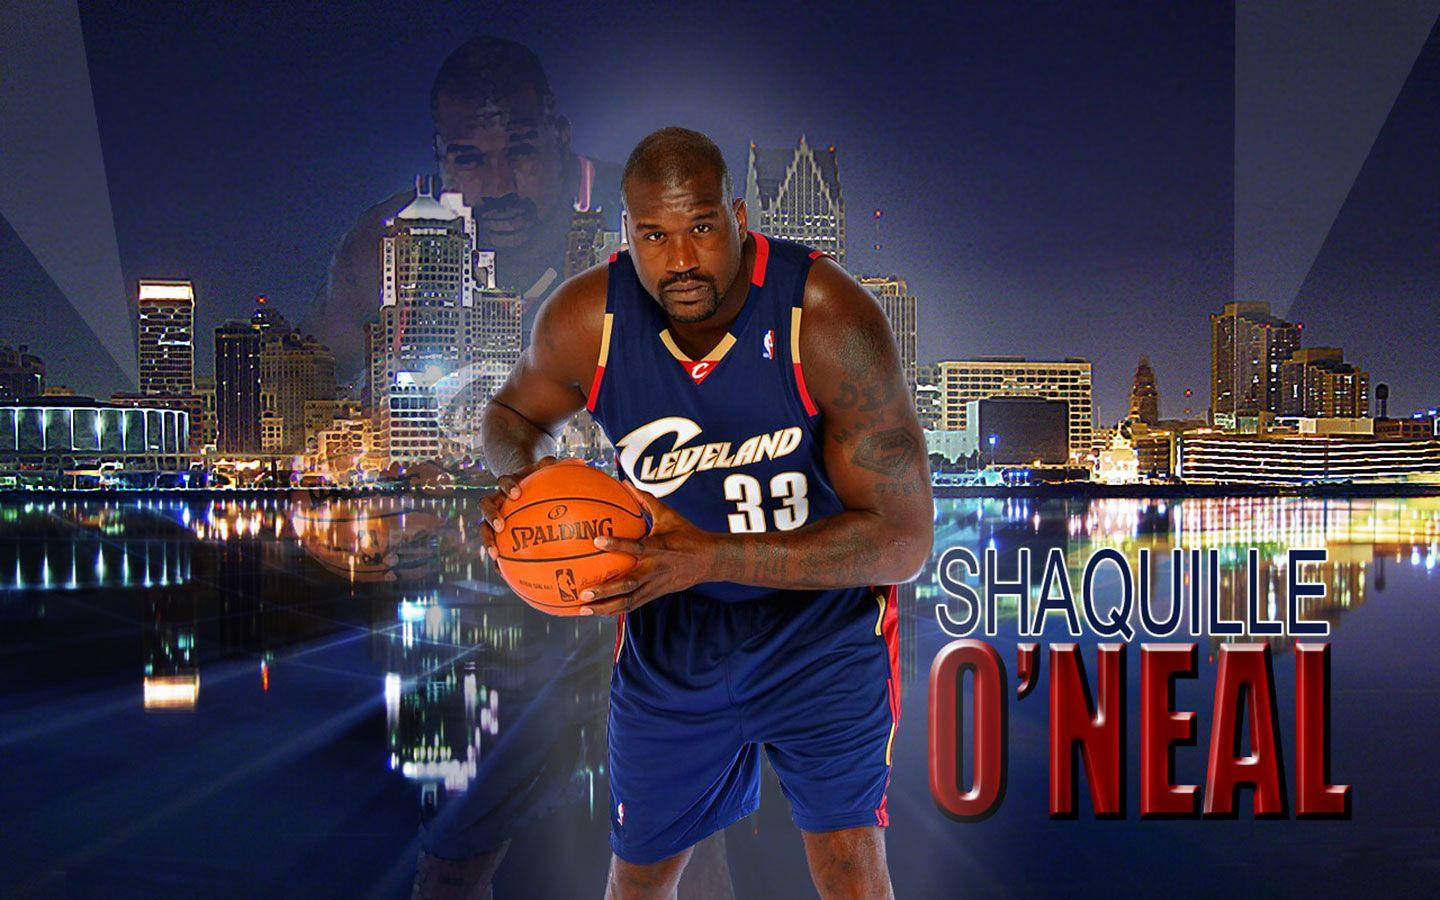 Shaquille O'neal Blue Cavalier Art Background